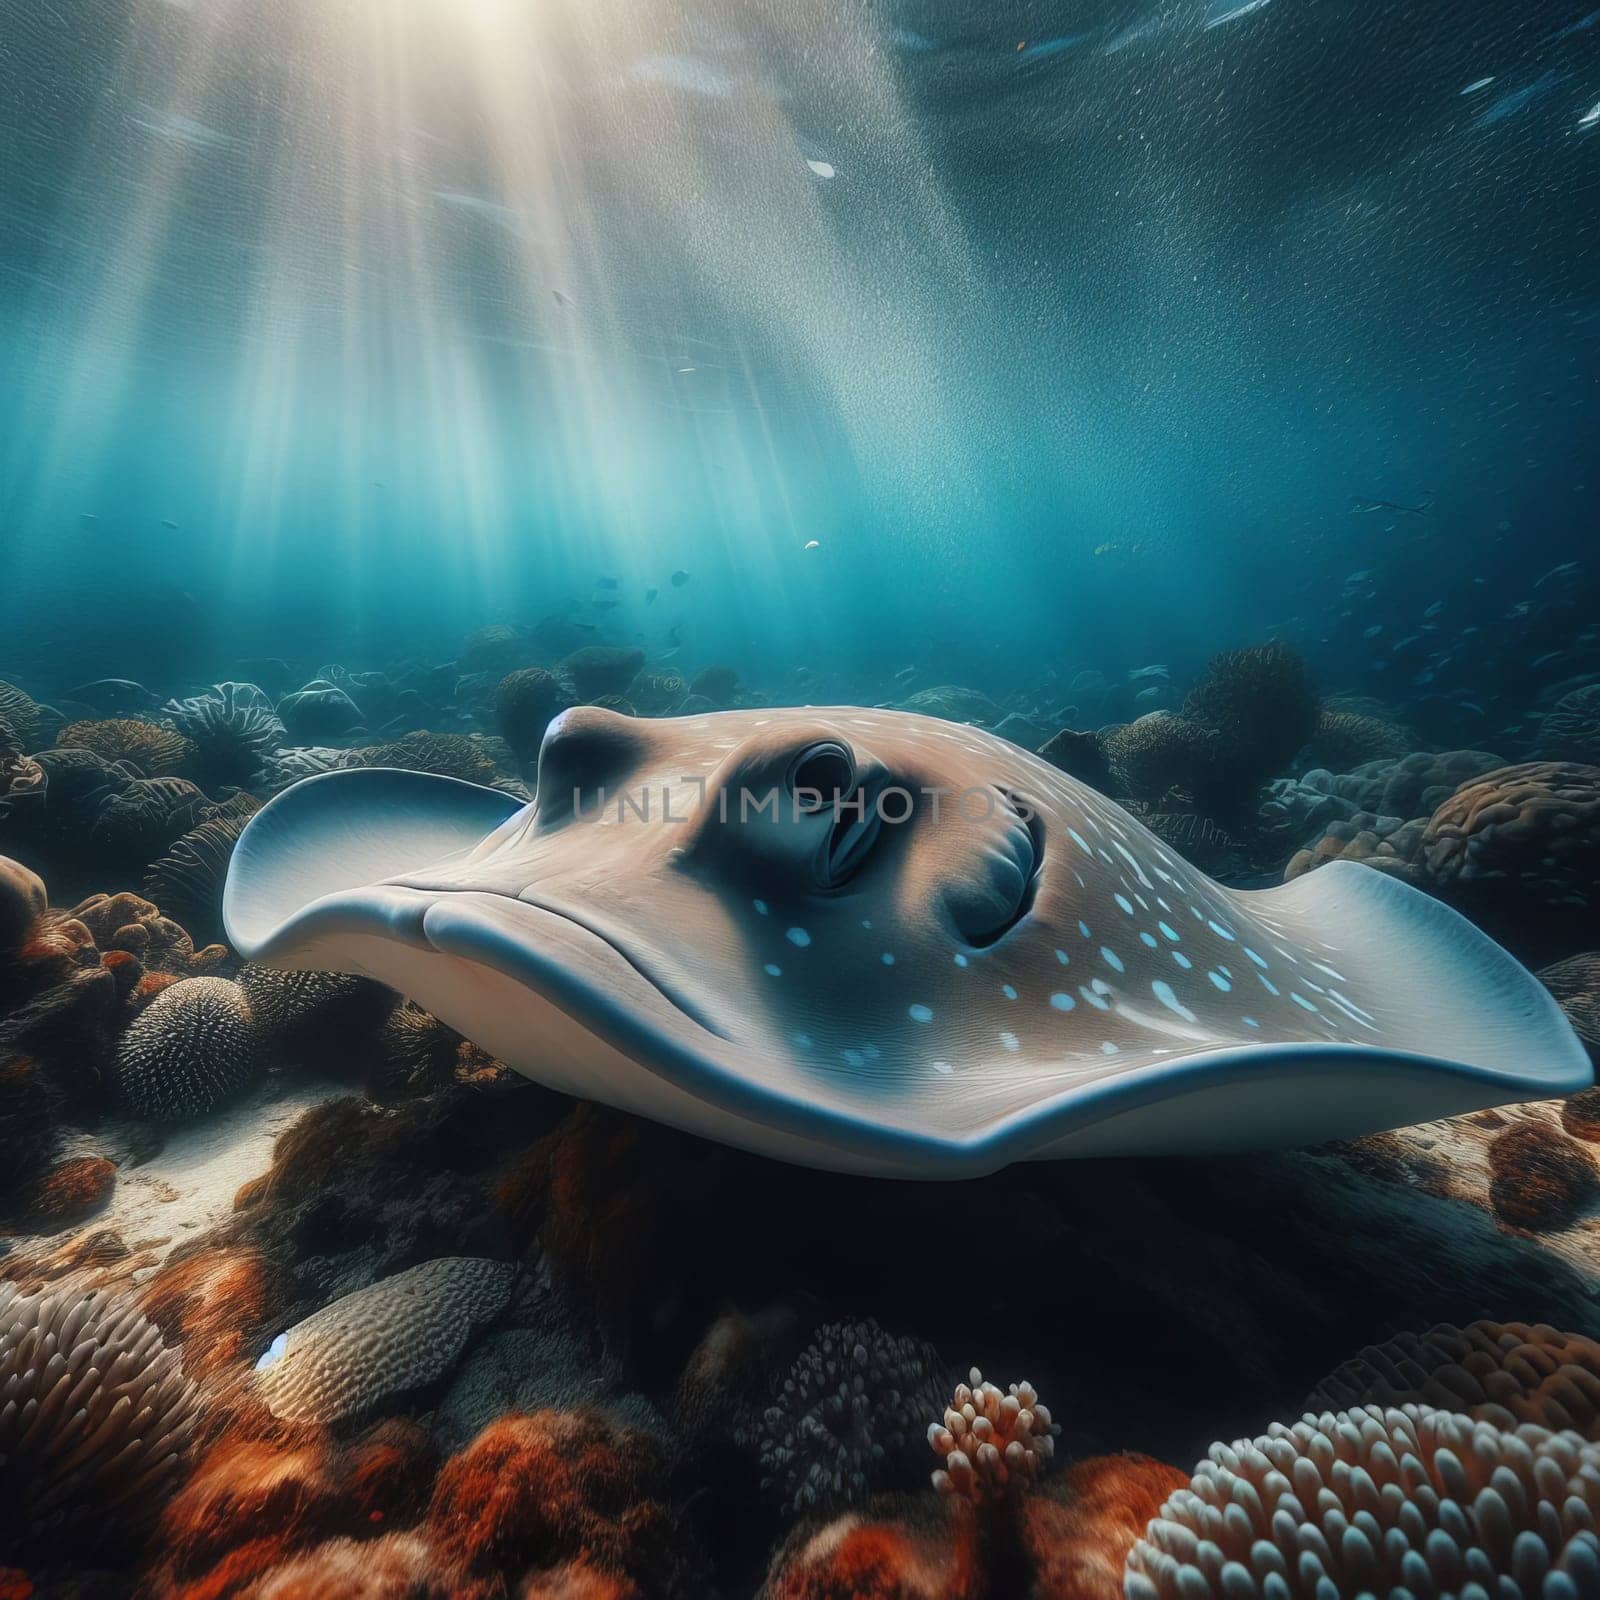 A stingray gracefully swims over a vibrant coral reef, bathed in the sun's rays filtering through the ocean's surface